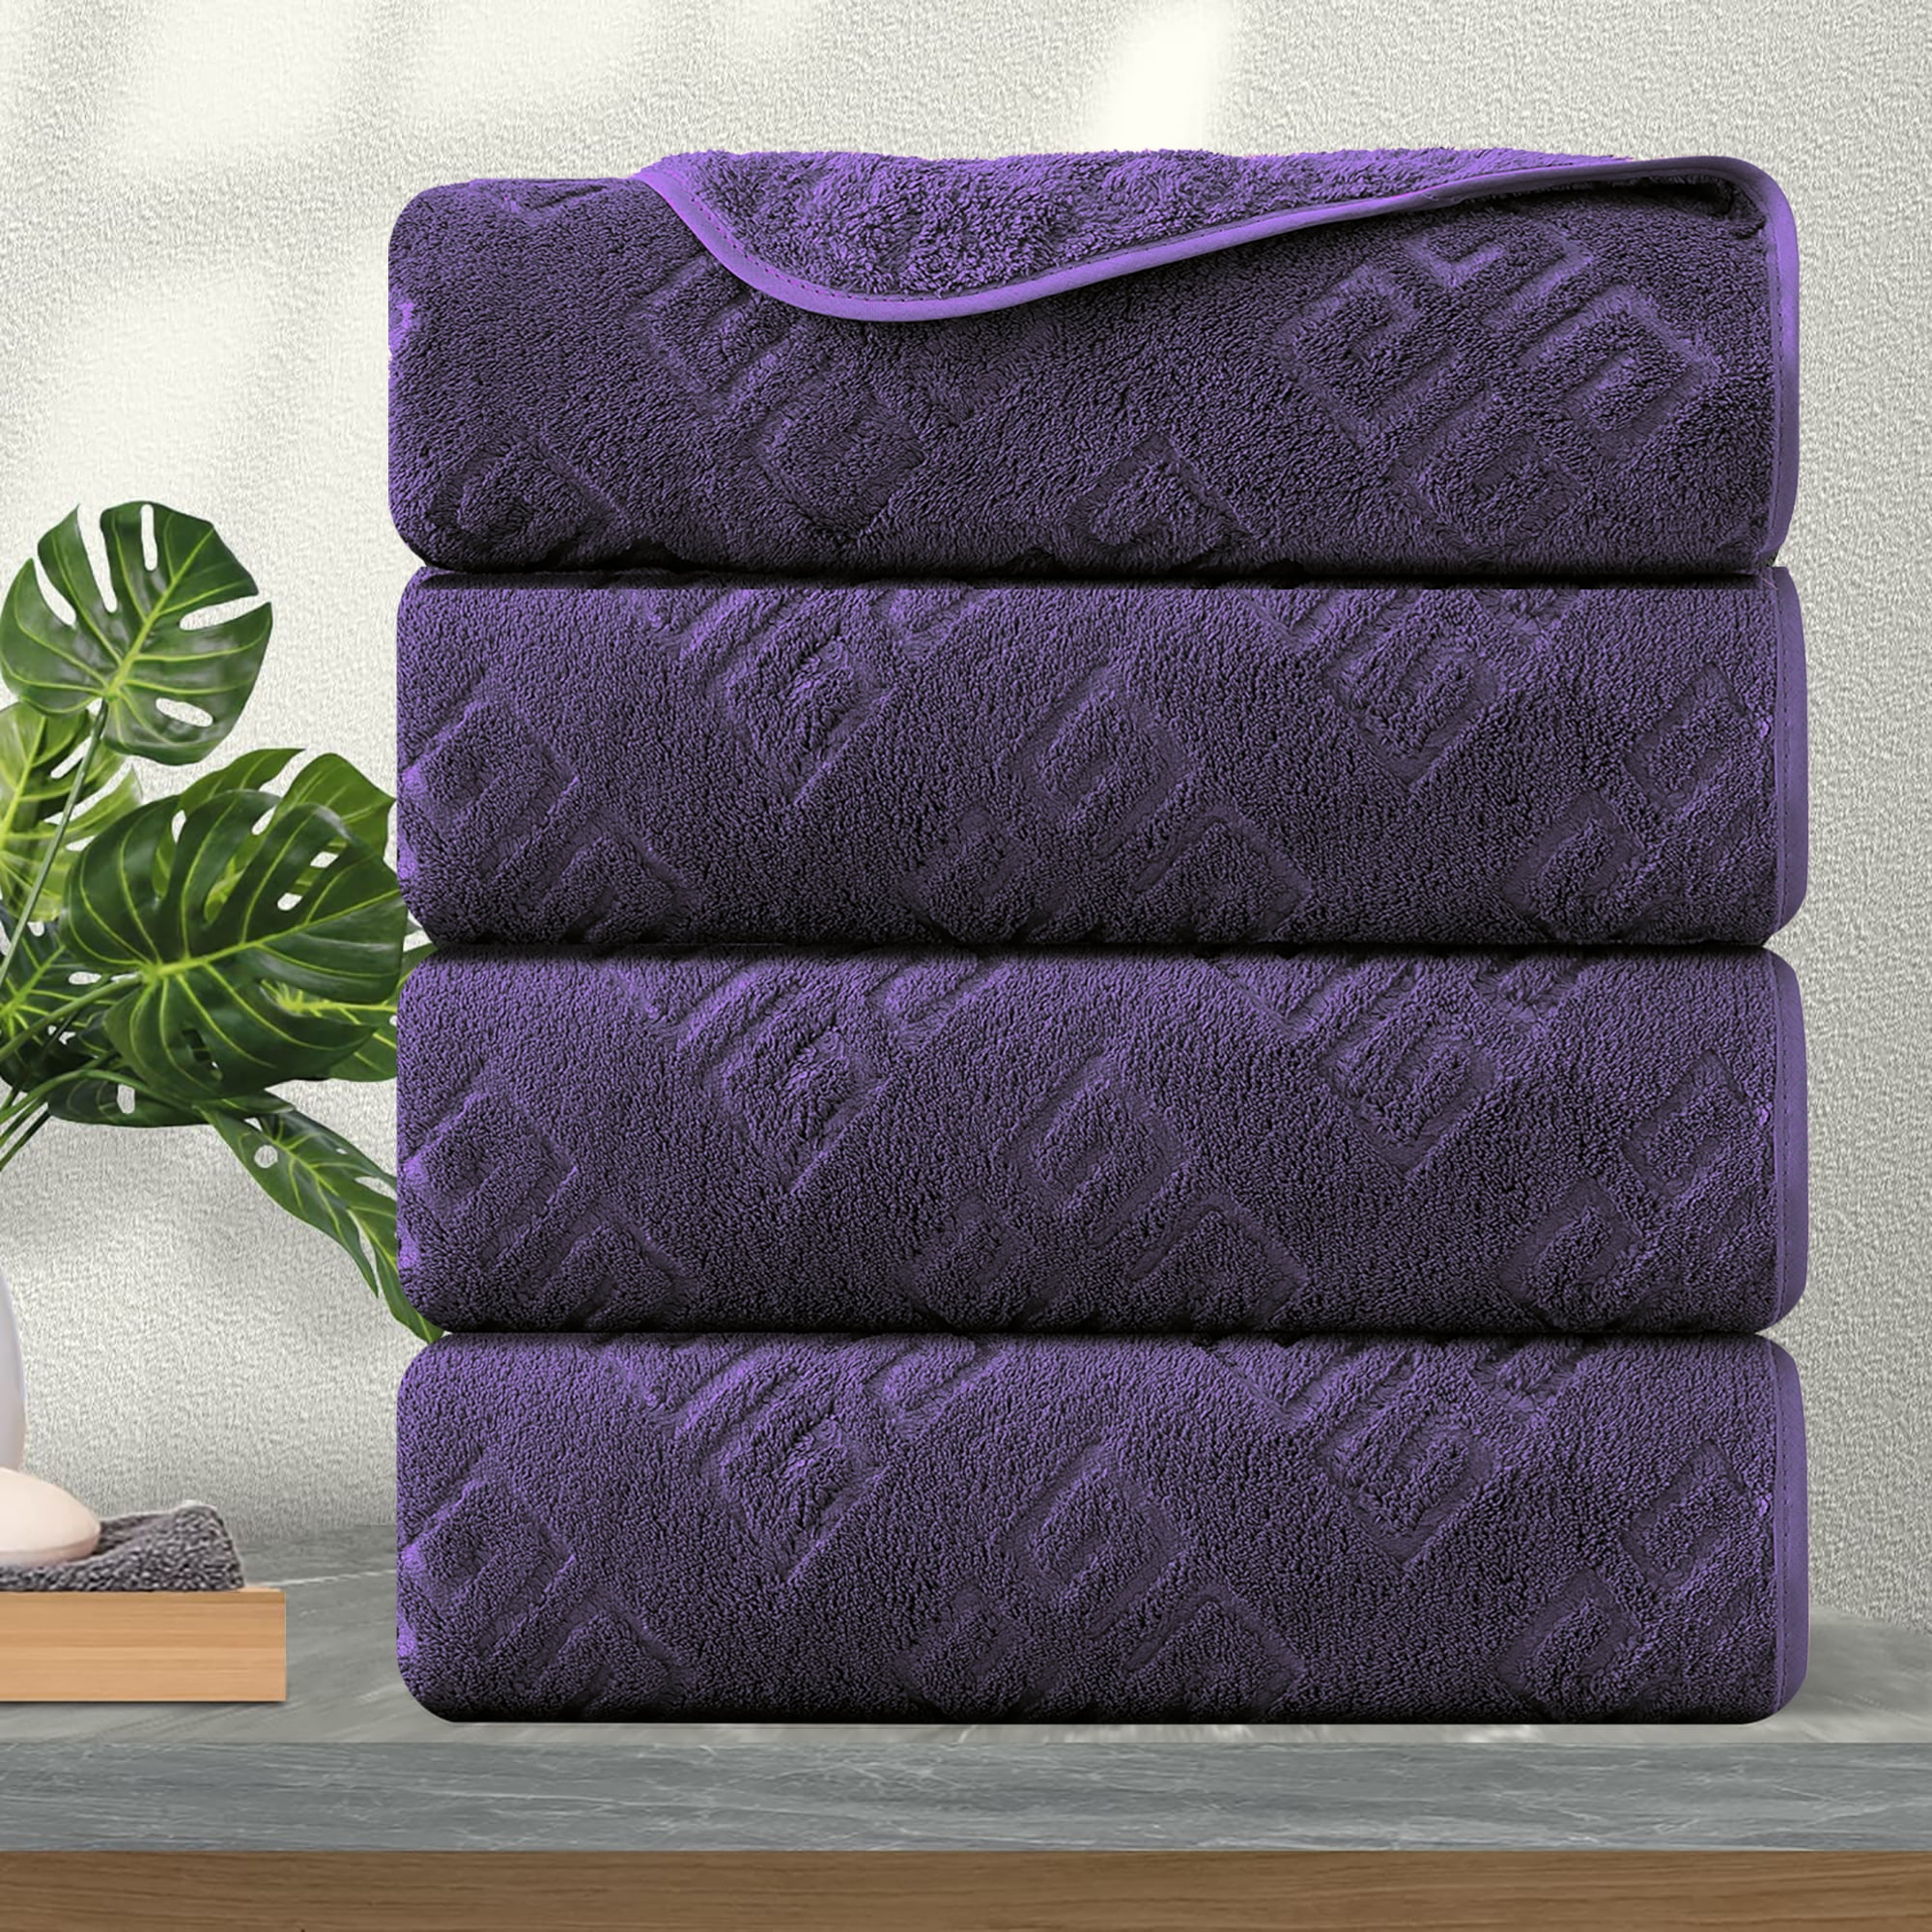 Luxury Thick Bath Towels 19.7 inch x 39.4 inch Premium Bath Sheet/Ultra Soft, Highly Absorbent Heavy Weight Combed Cotton (Purple), Size: 19.7 x 39.4